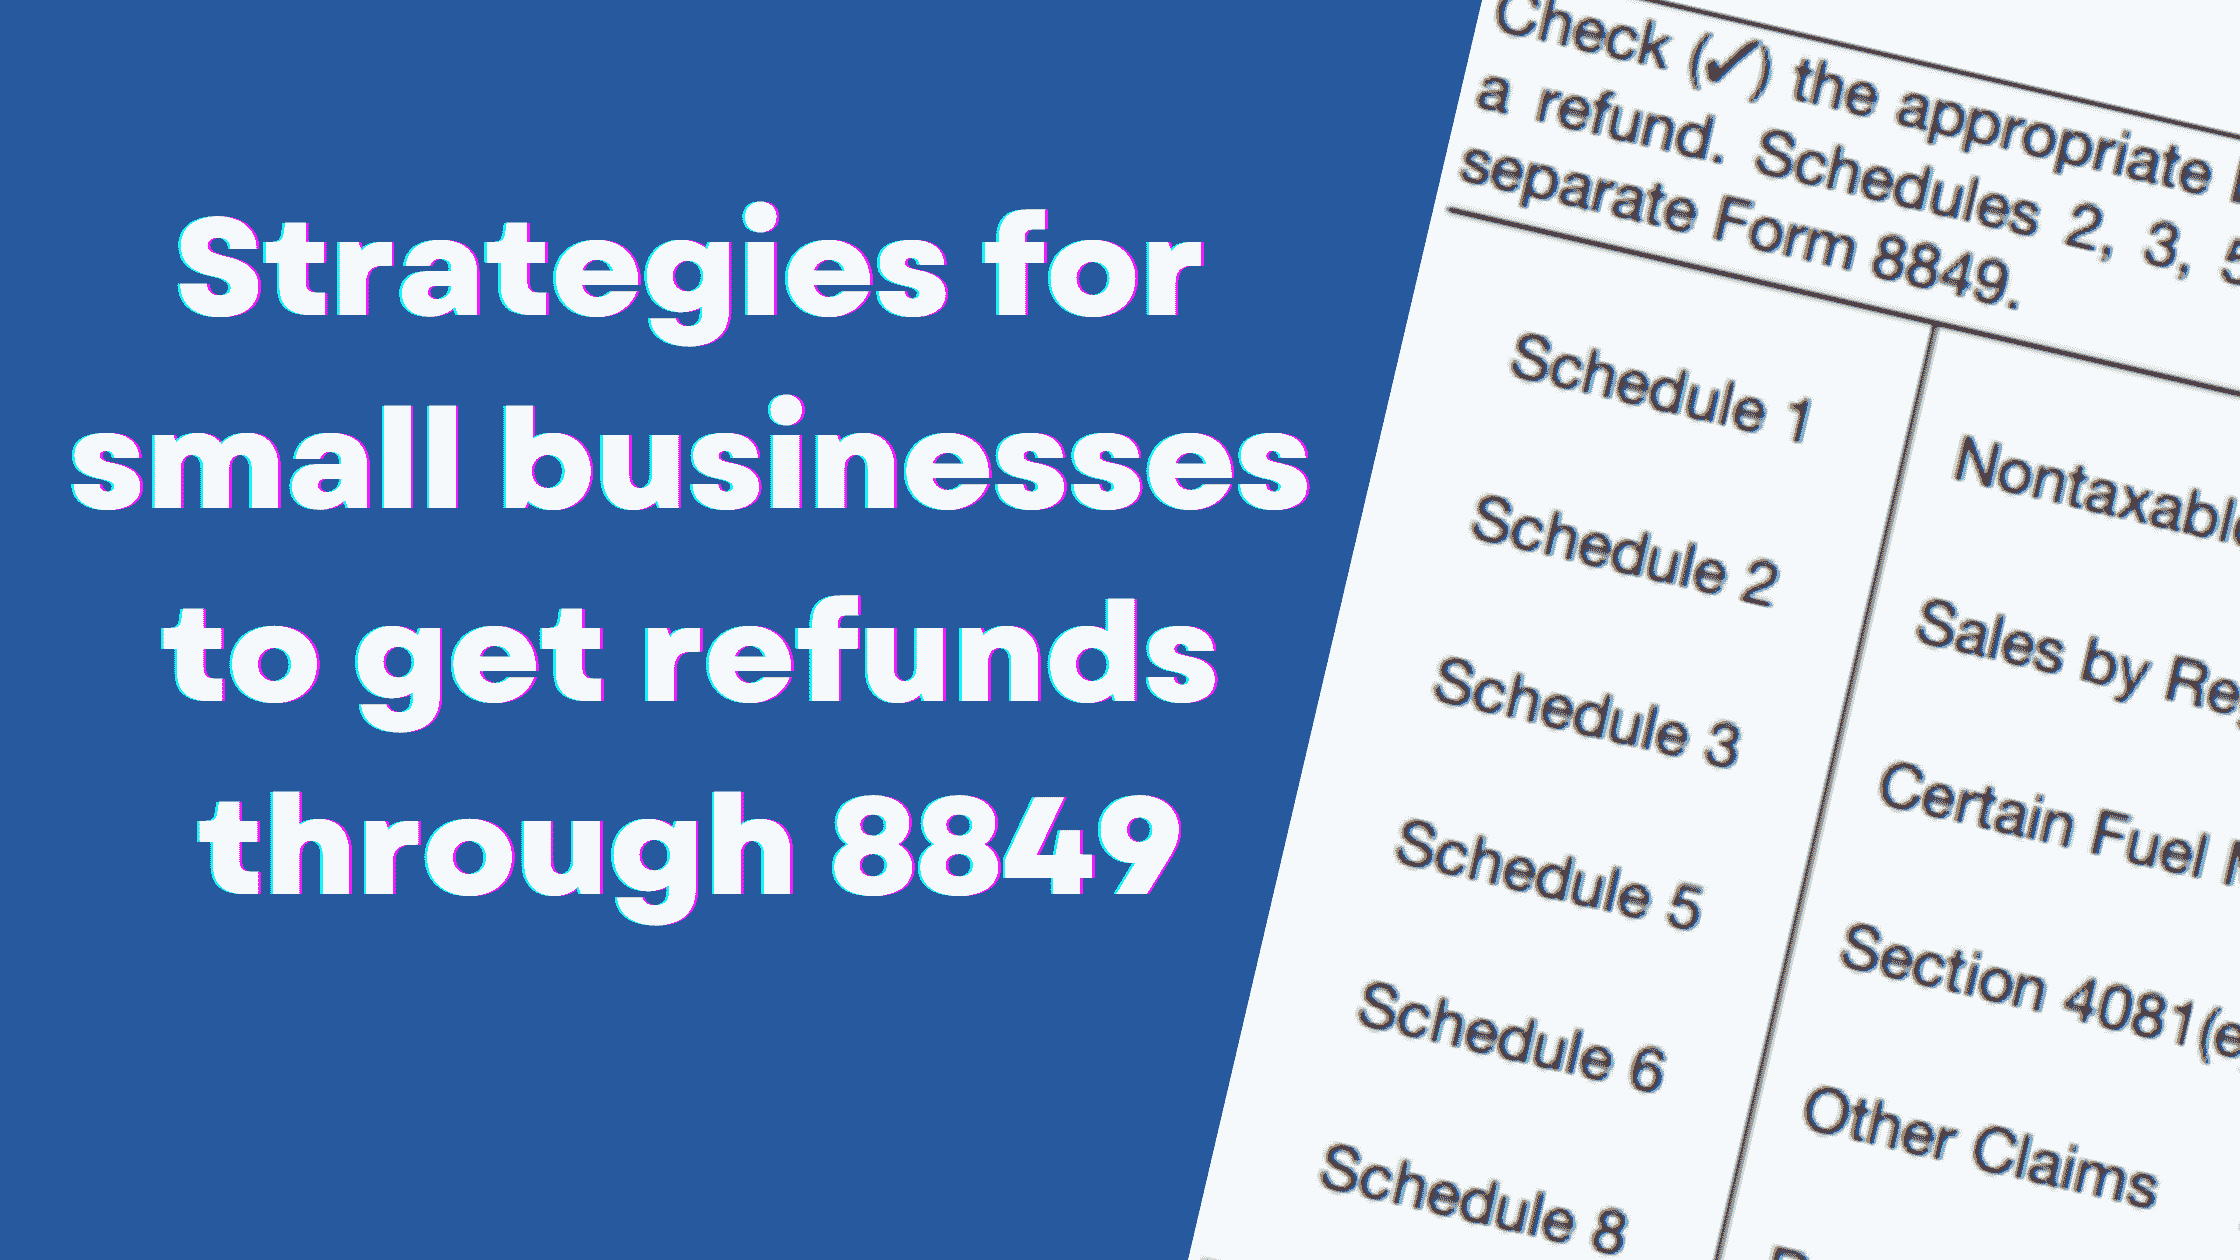 Strategies for small businesses to get refunds through 8849